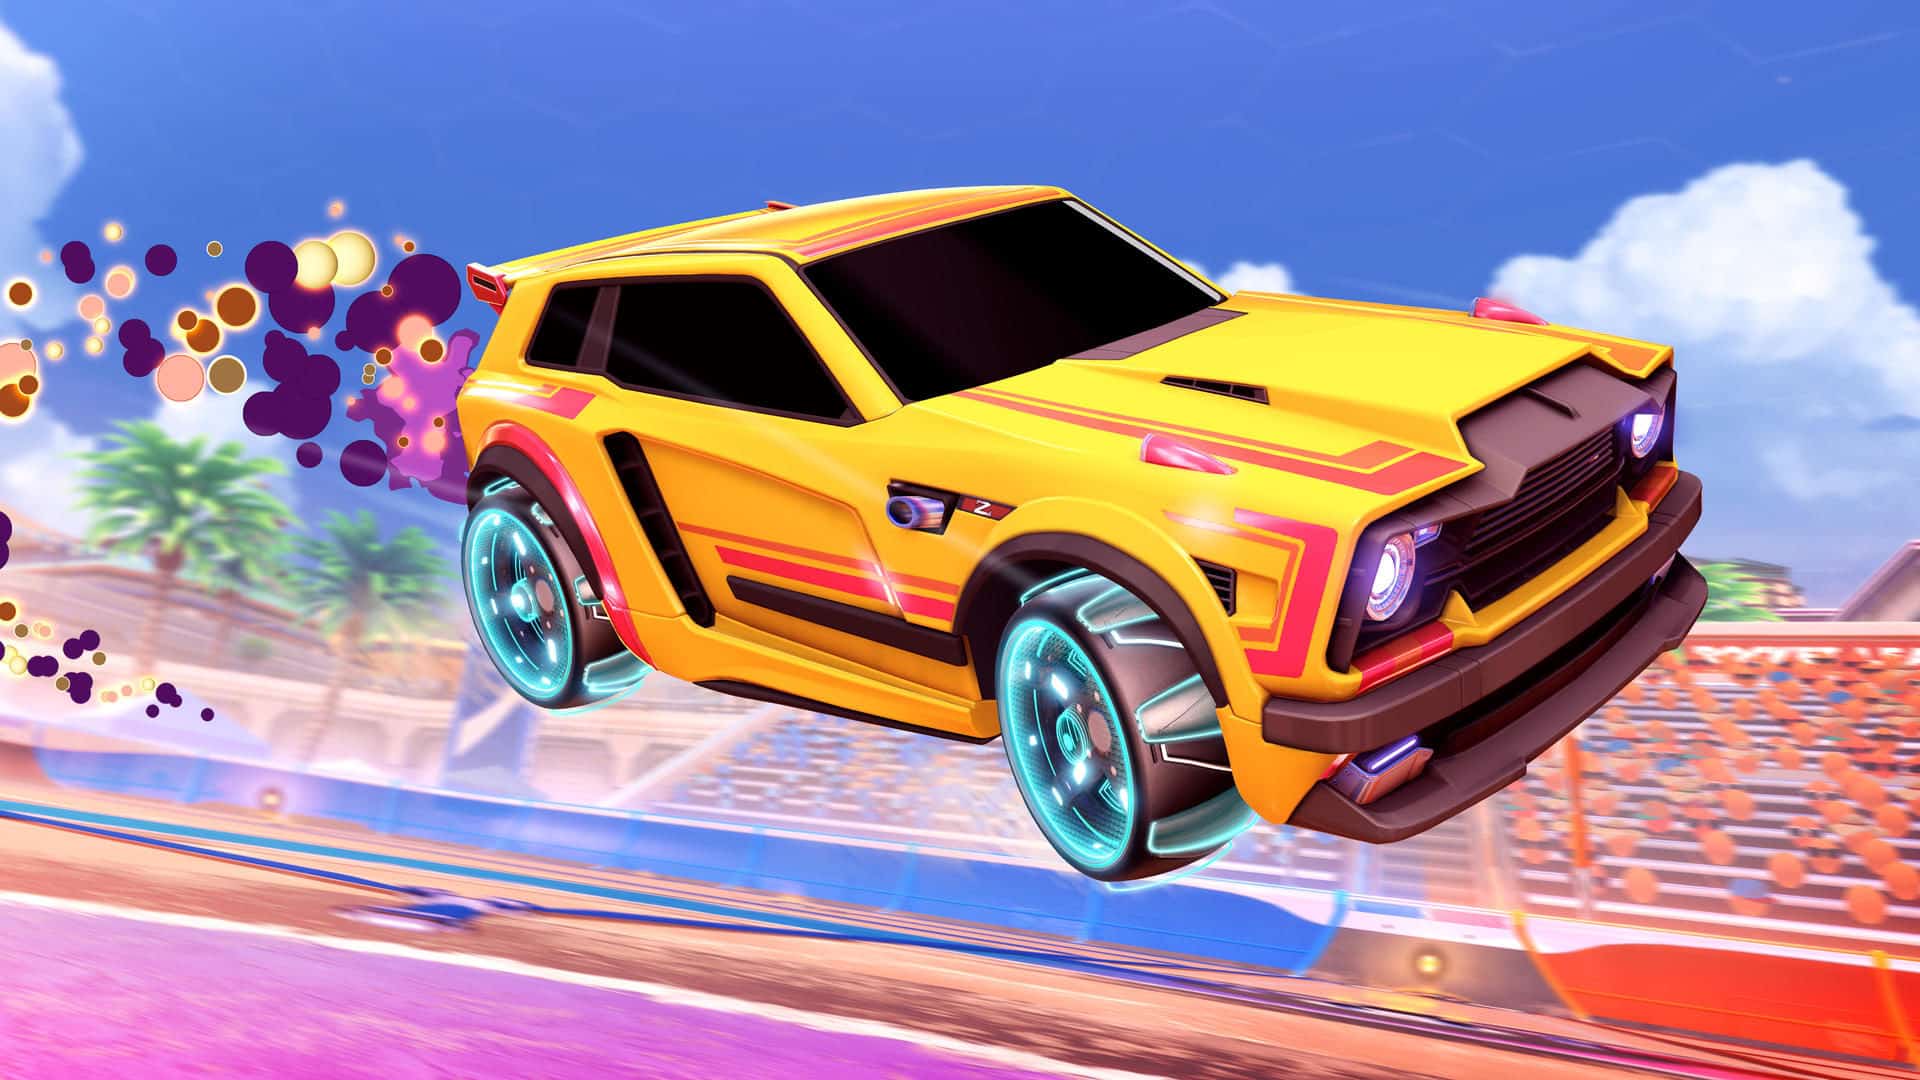 Rocket League: Neue „Totally Awesome“ Kiste kommt | gaming-grounds.de1920 x 1080